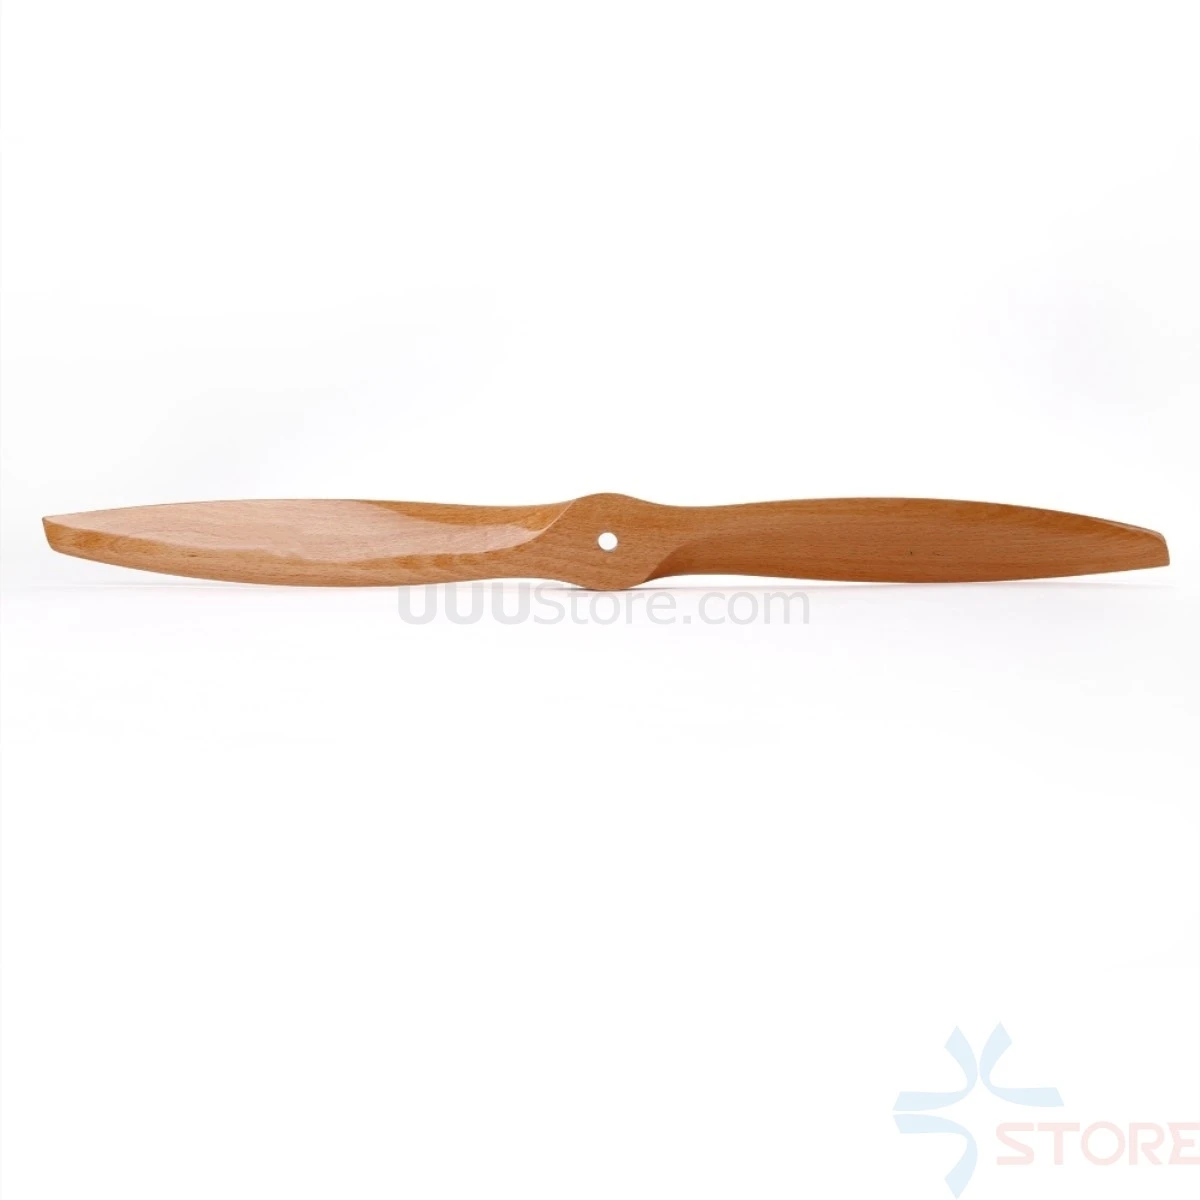 Wood Wooden Propeller 27x8,27x10,28x8,28x10 Prop for RC Aircraft Plane Airplane DLE110CC Gasoline Engine 1